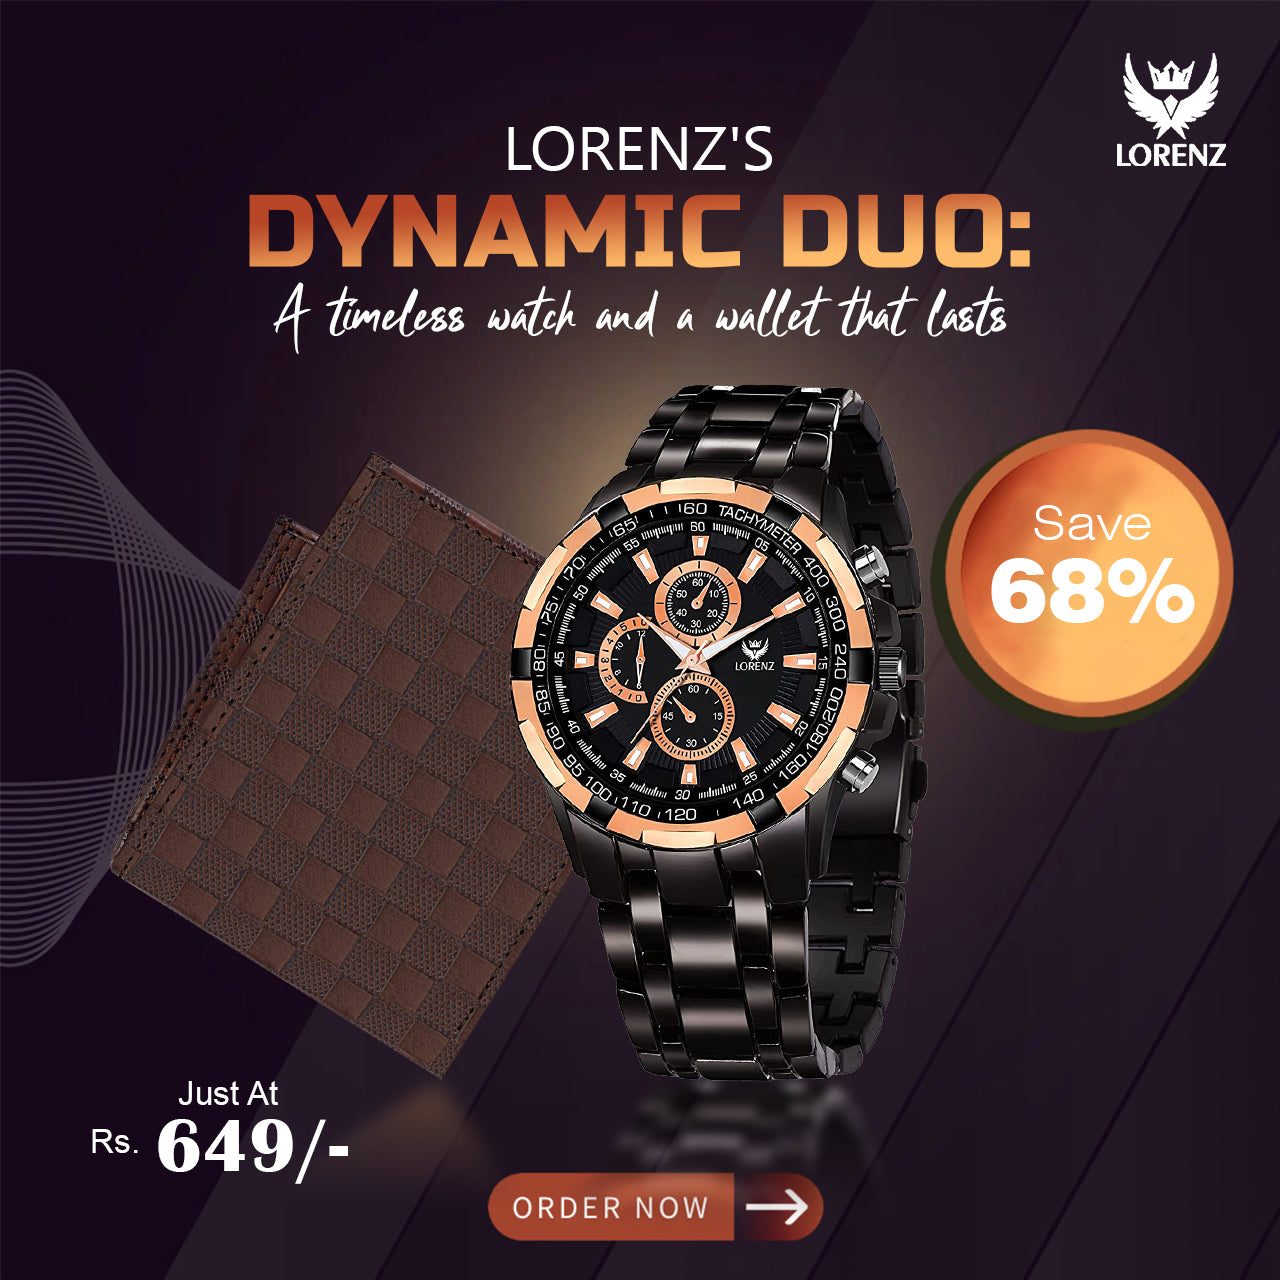 Lorenz Dynamic Duo Watch and Wallet Combo Rs 649/-